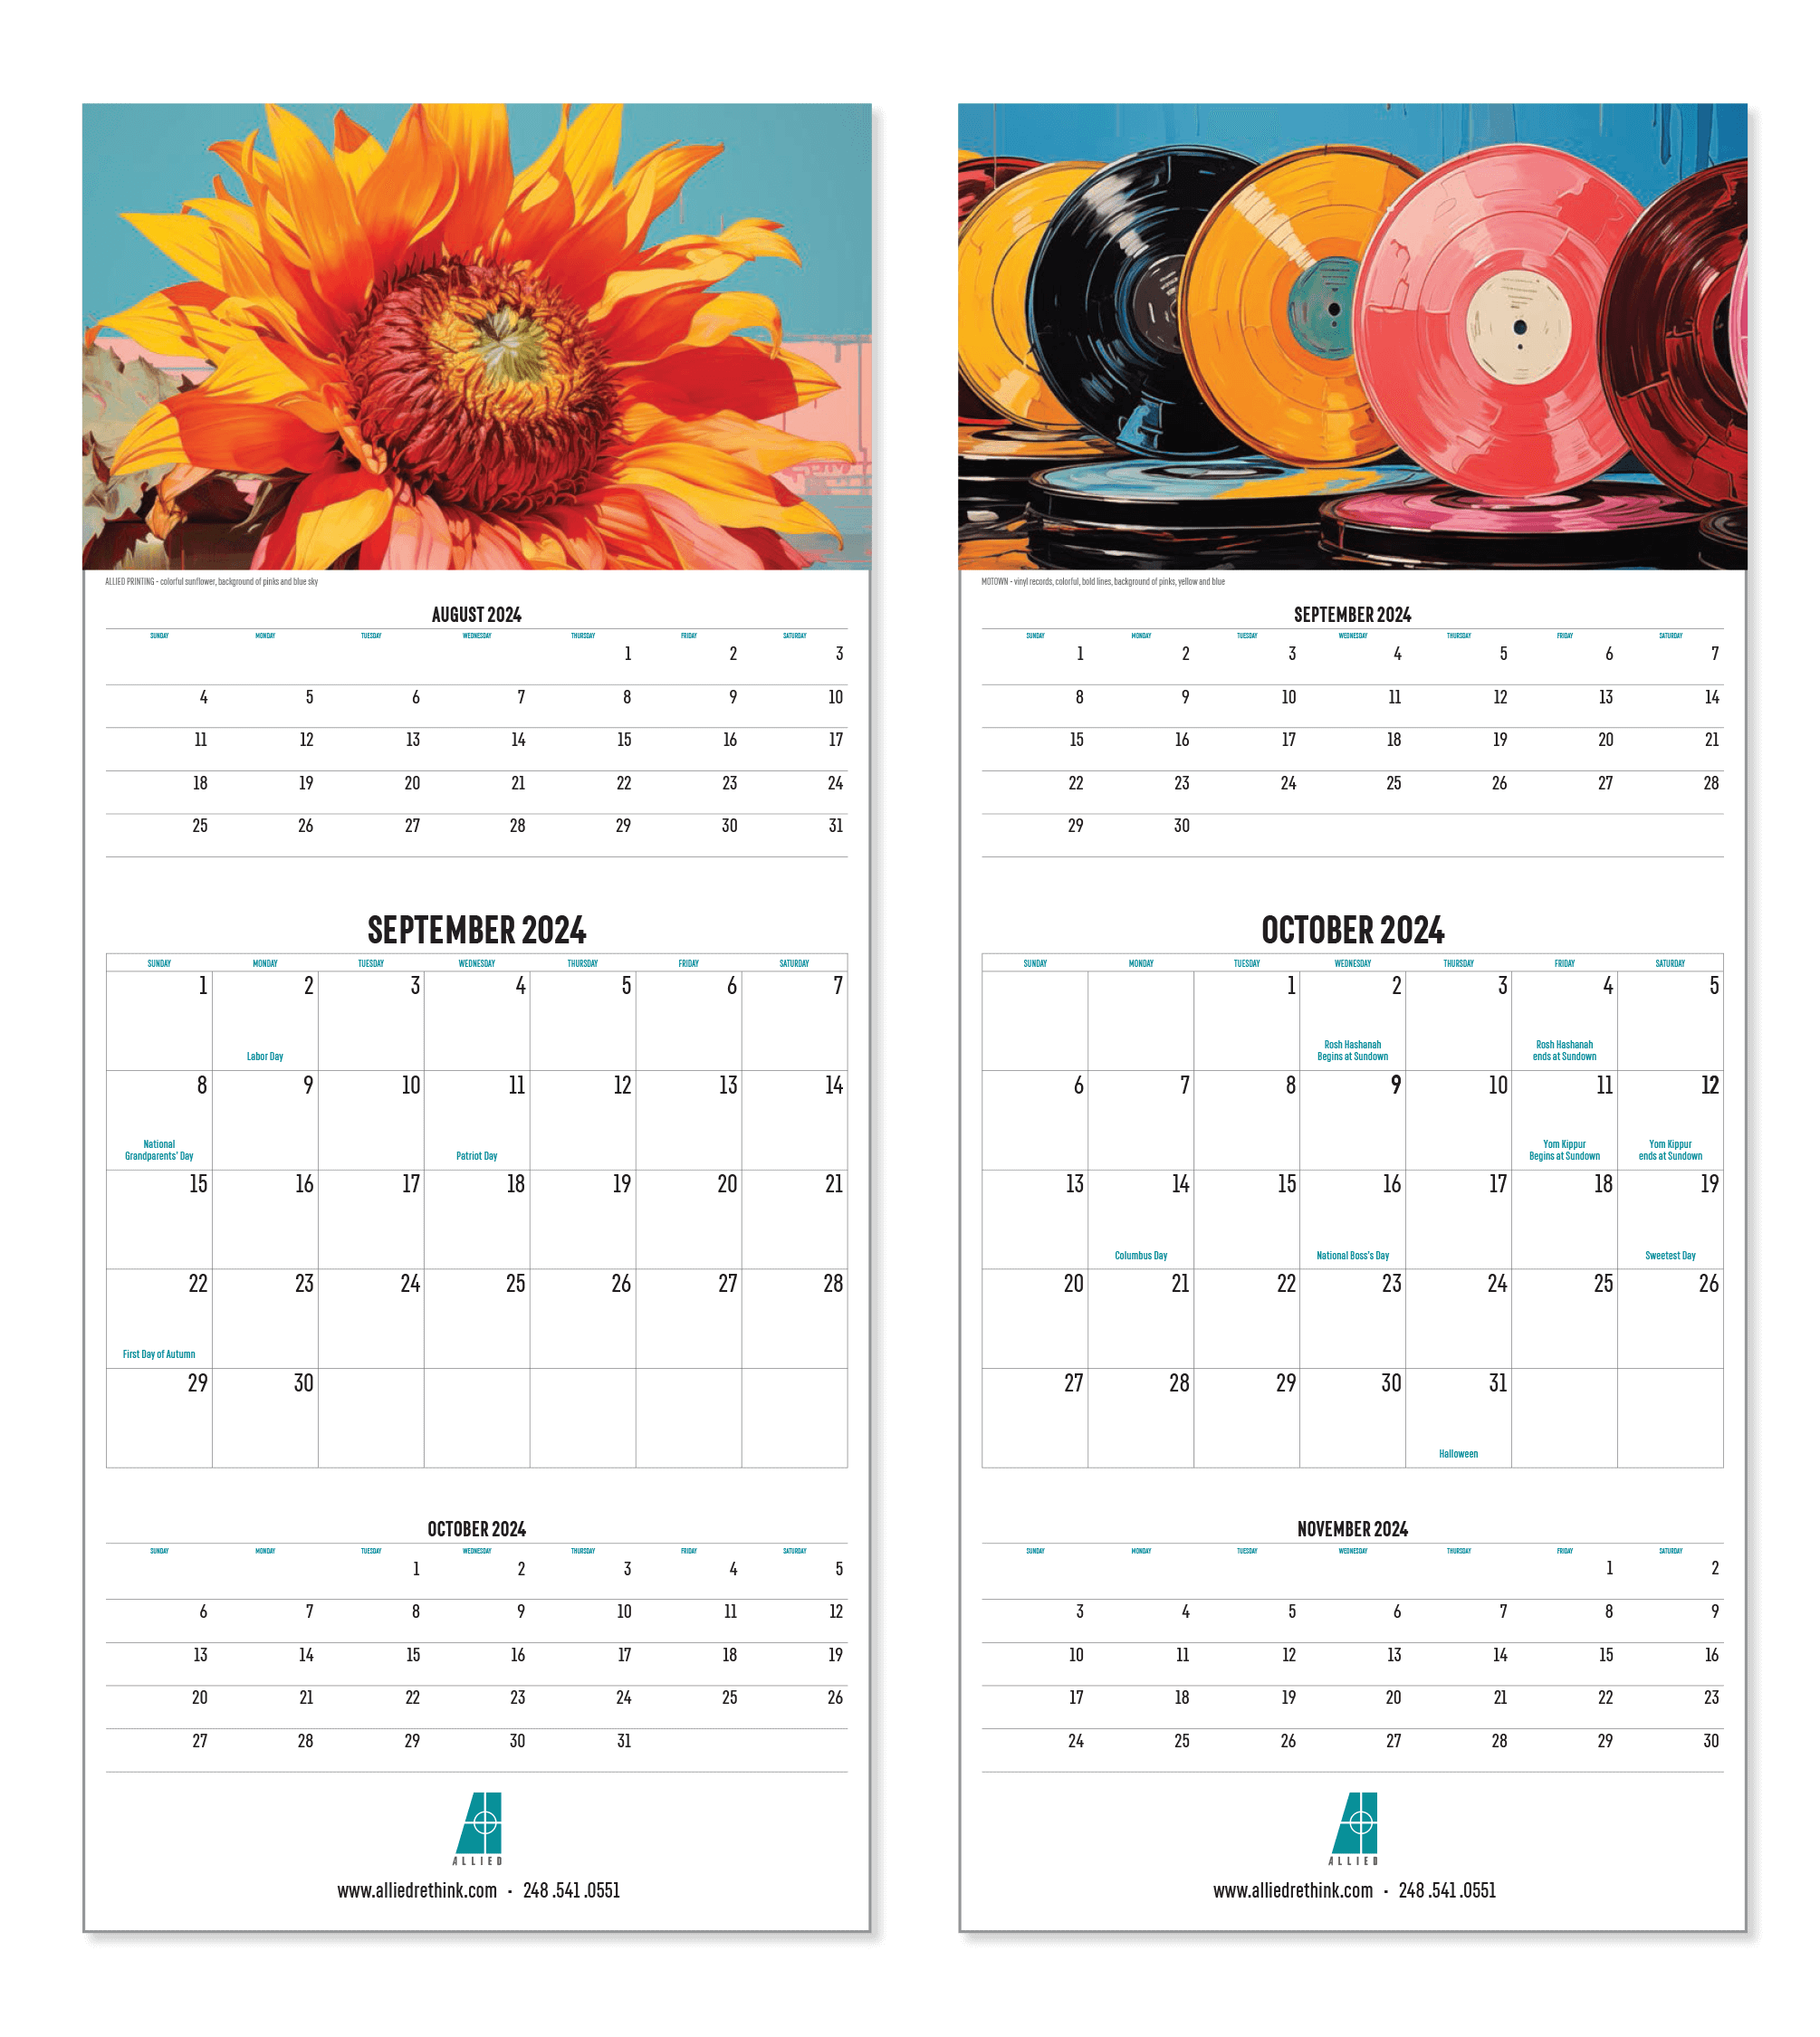 Allied calendar sunflower and Motown records